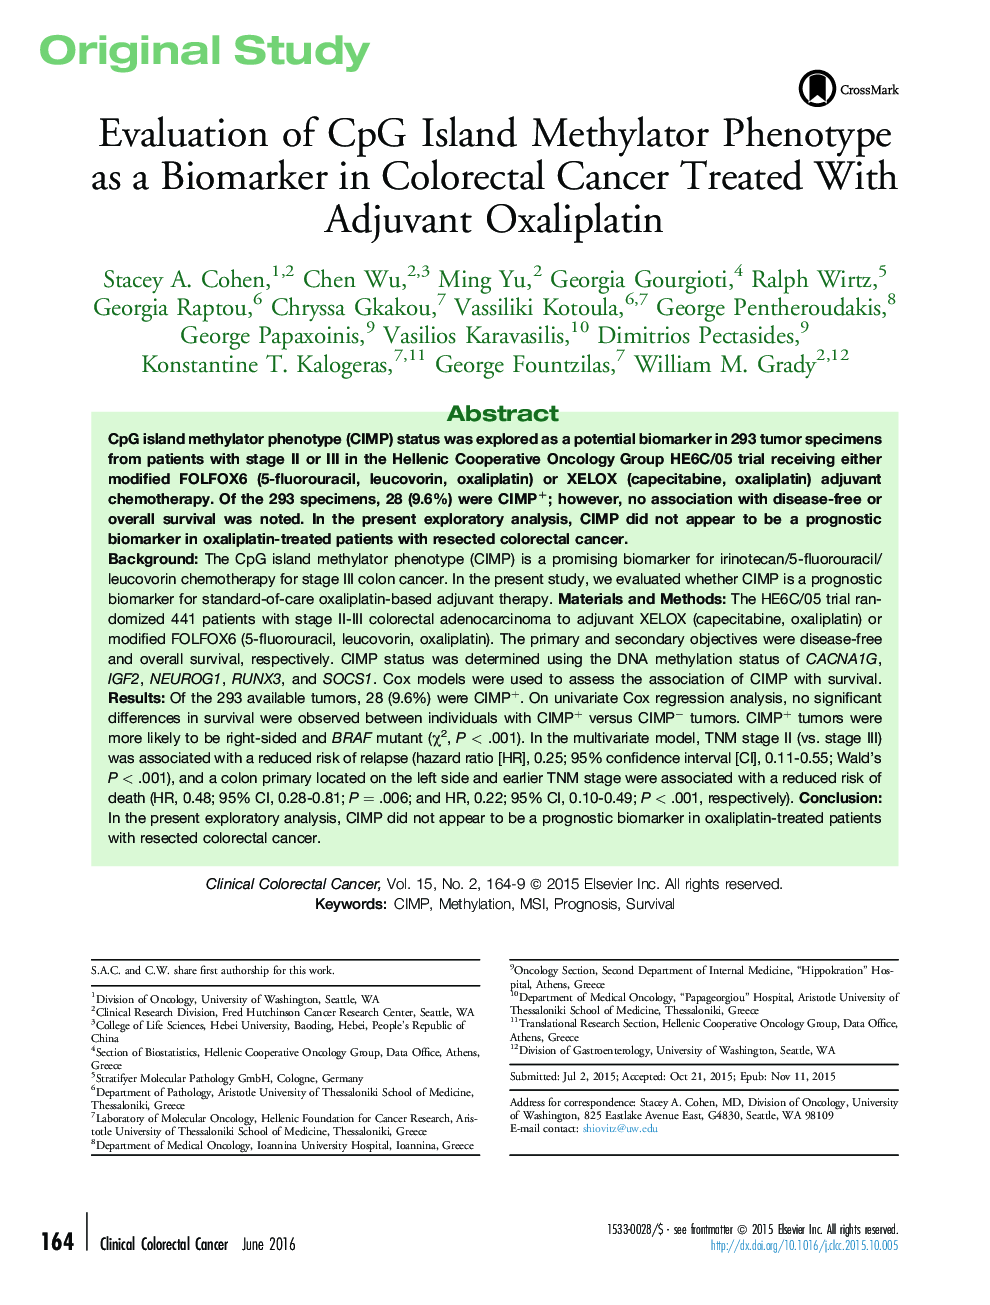 Original StudyEvaluation of CpG Island Methylator Phenotype as a Biomarker in Colorectal Cancer Treated With Adjuvant Oxaliplatin